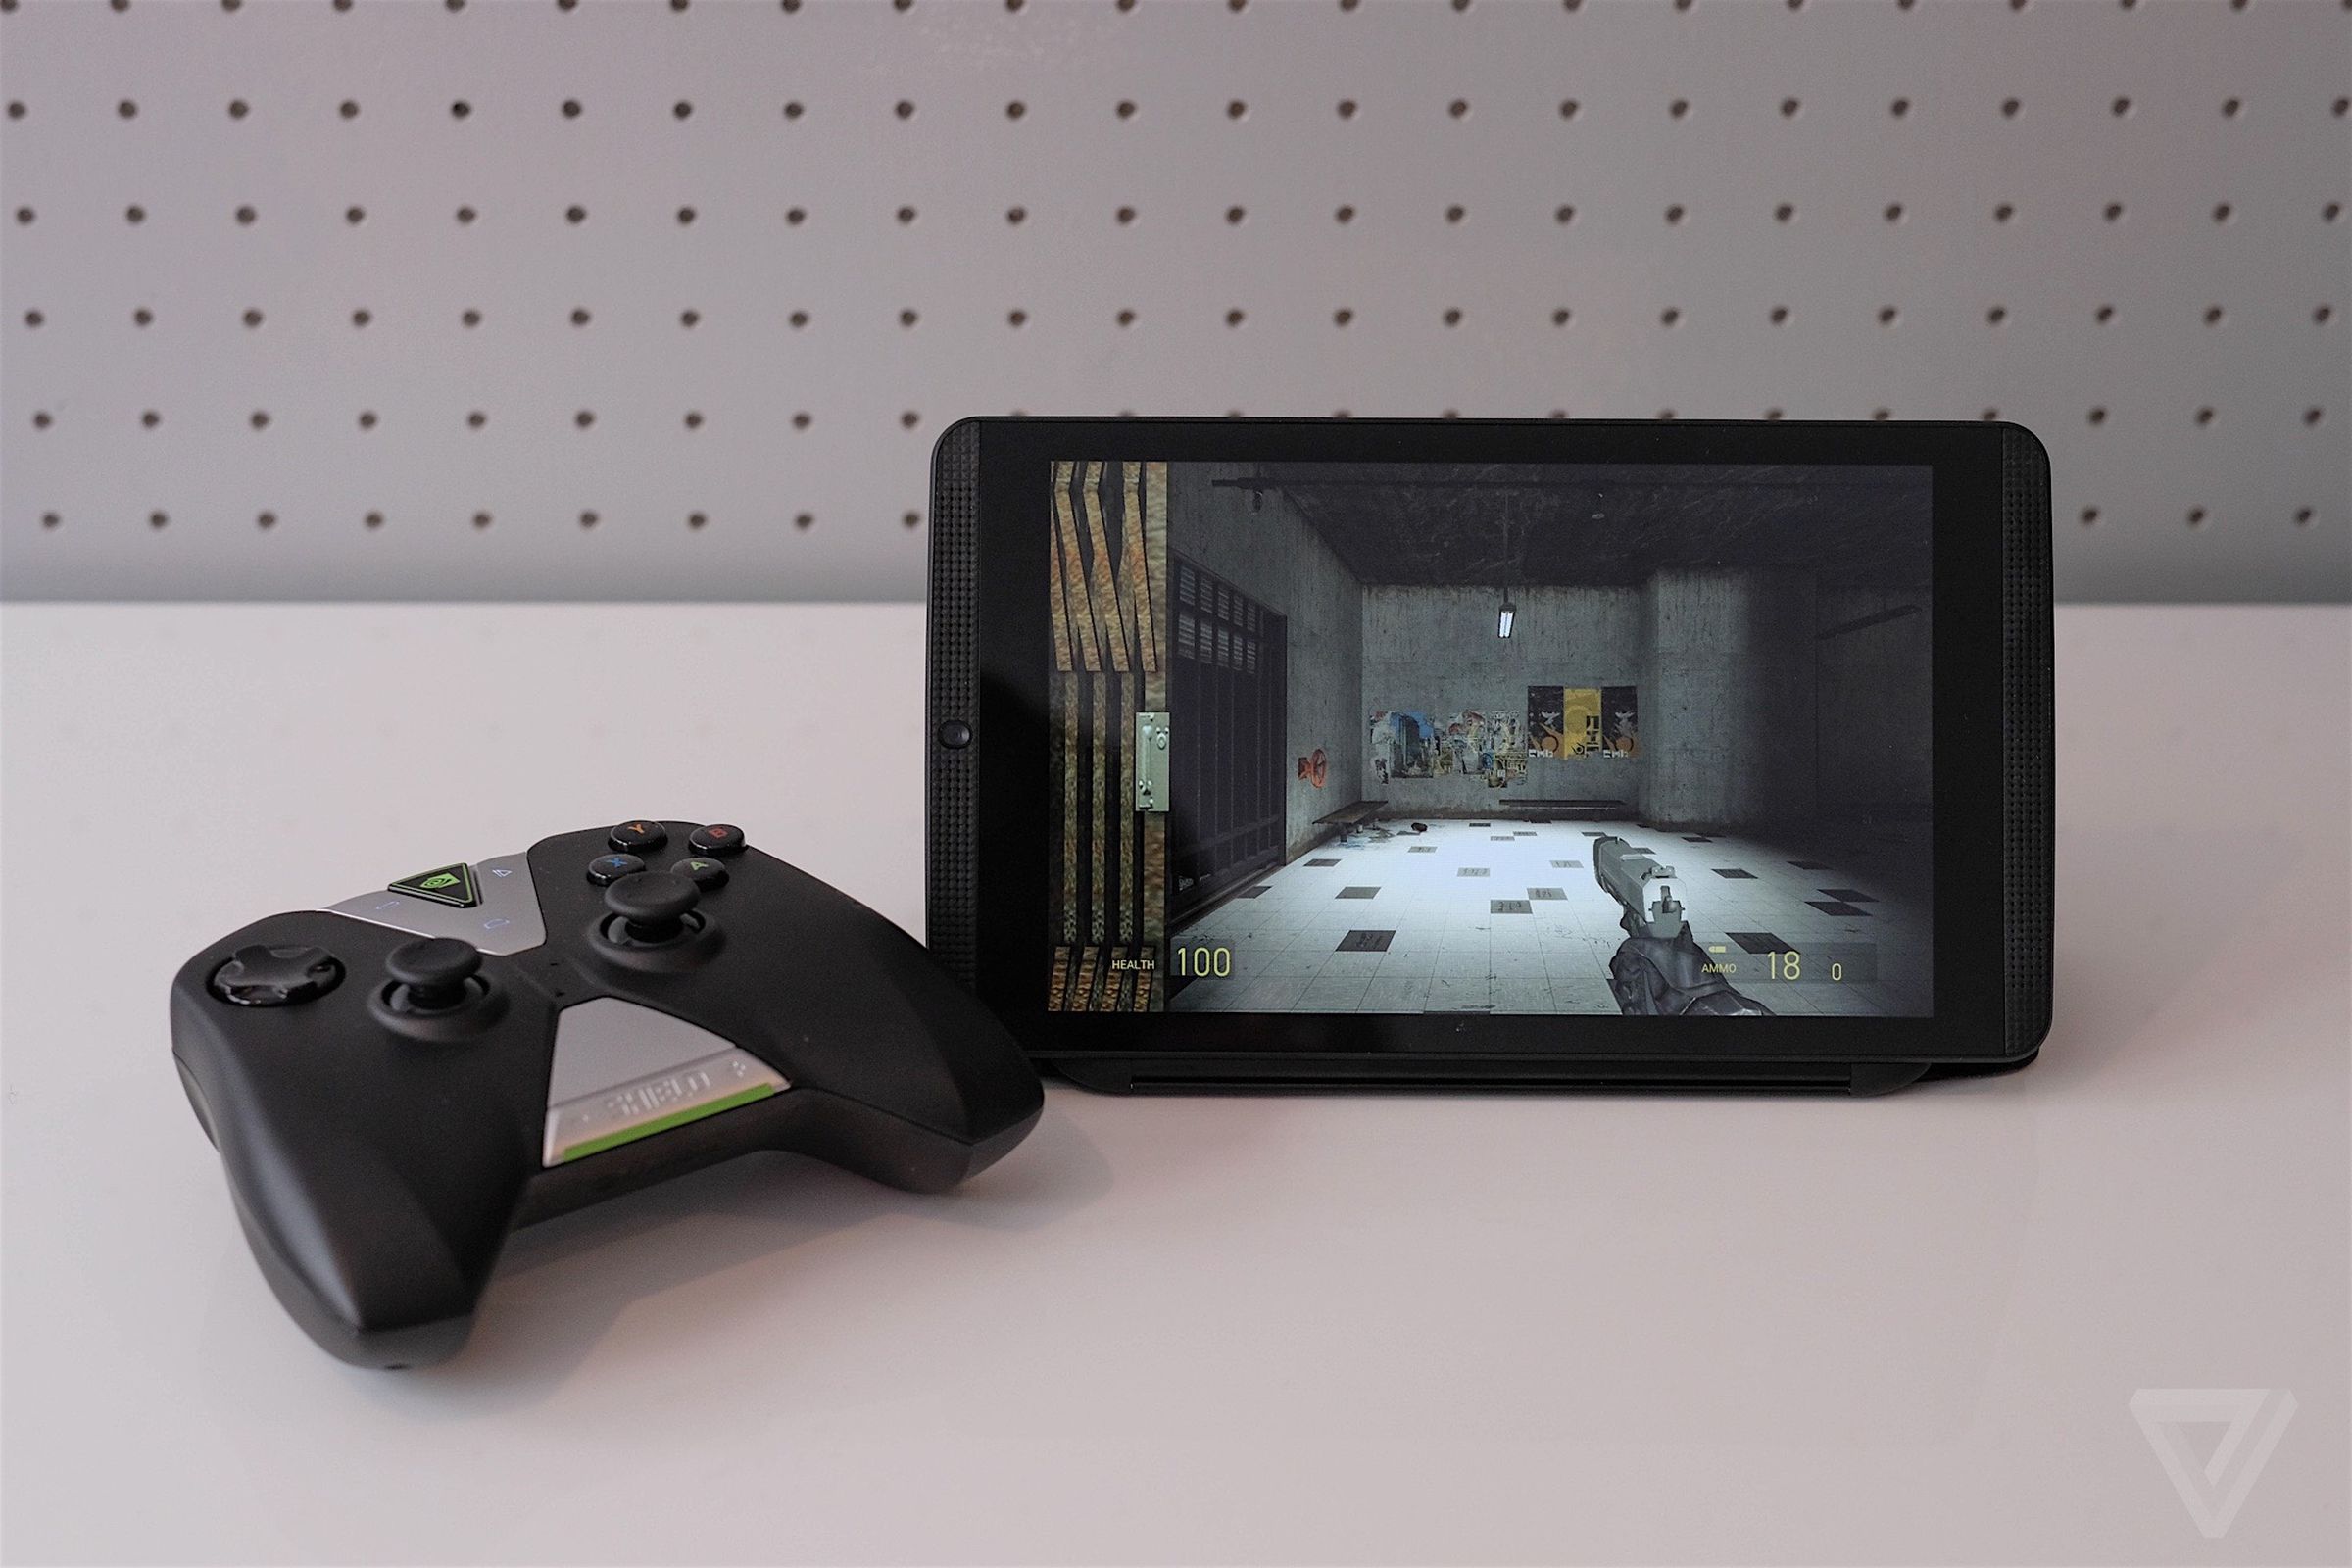 Nvidia’s last tablet was the Shield K1, released in 2015.